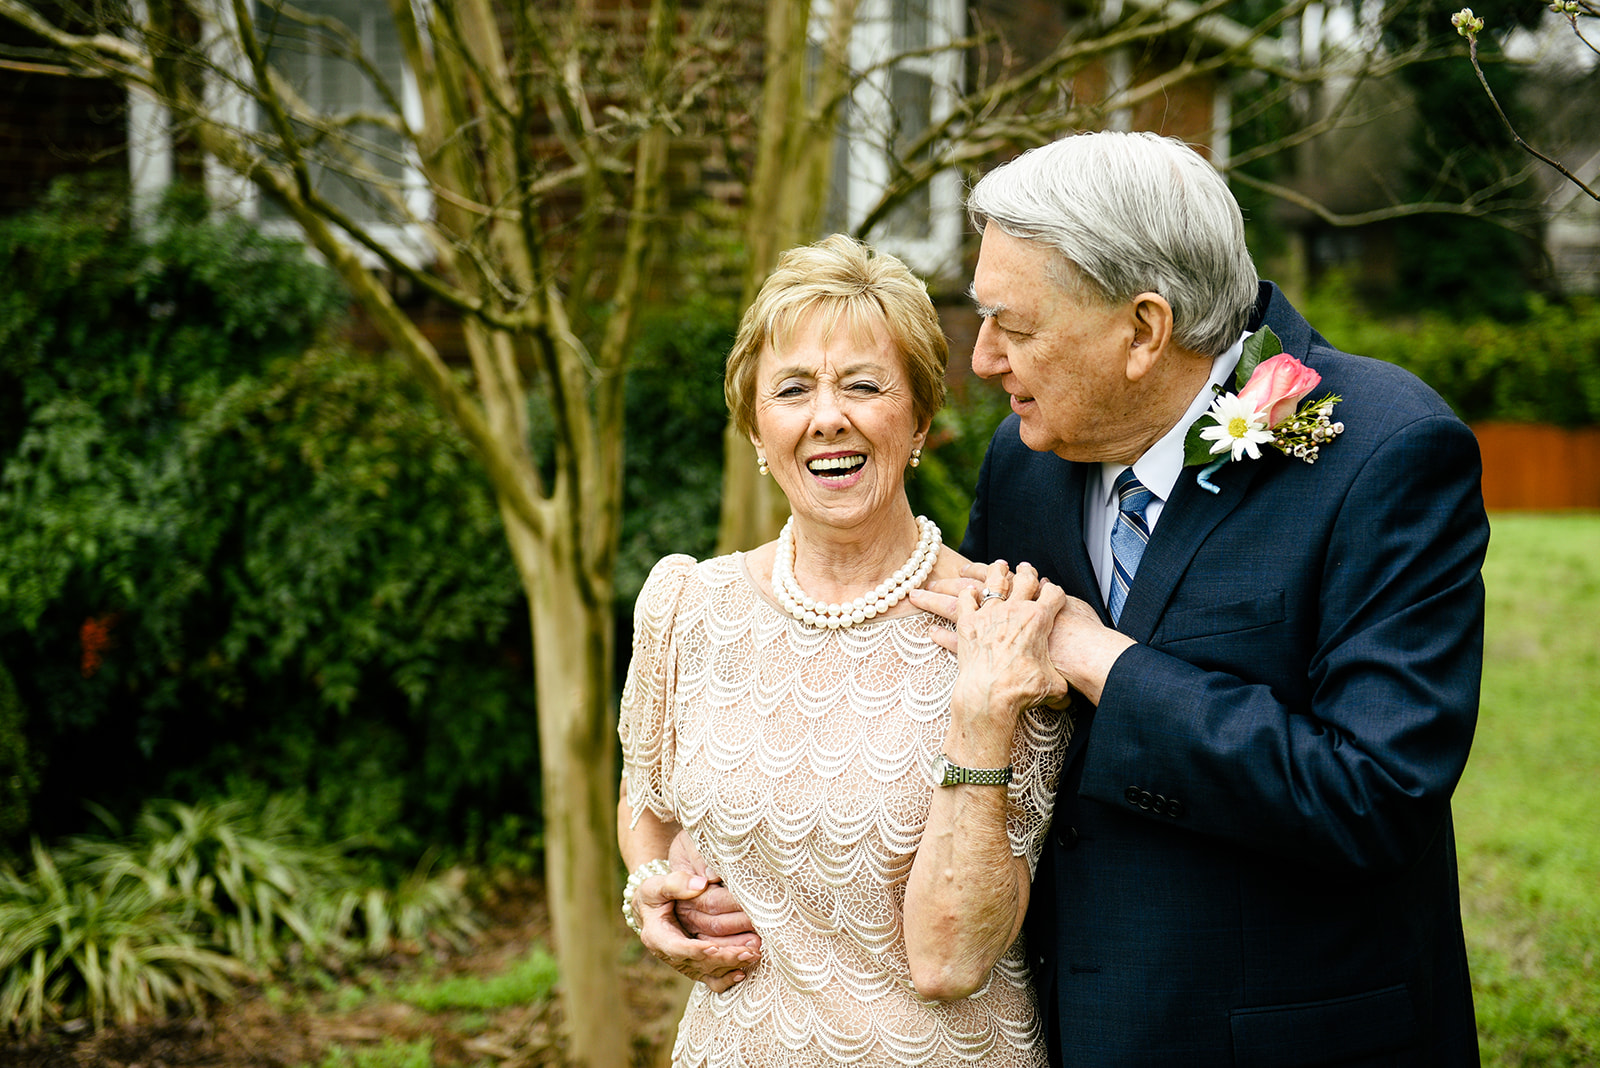 Sweet & Intimate In-Home Wedding by Photography by Janae featured on Nashville Bride Guide